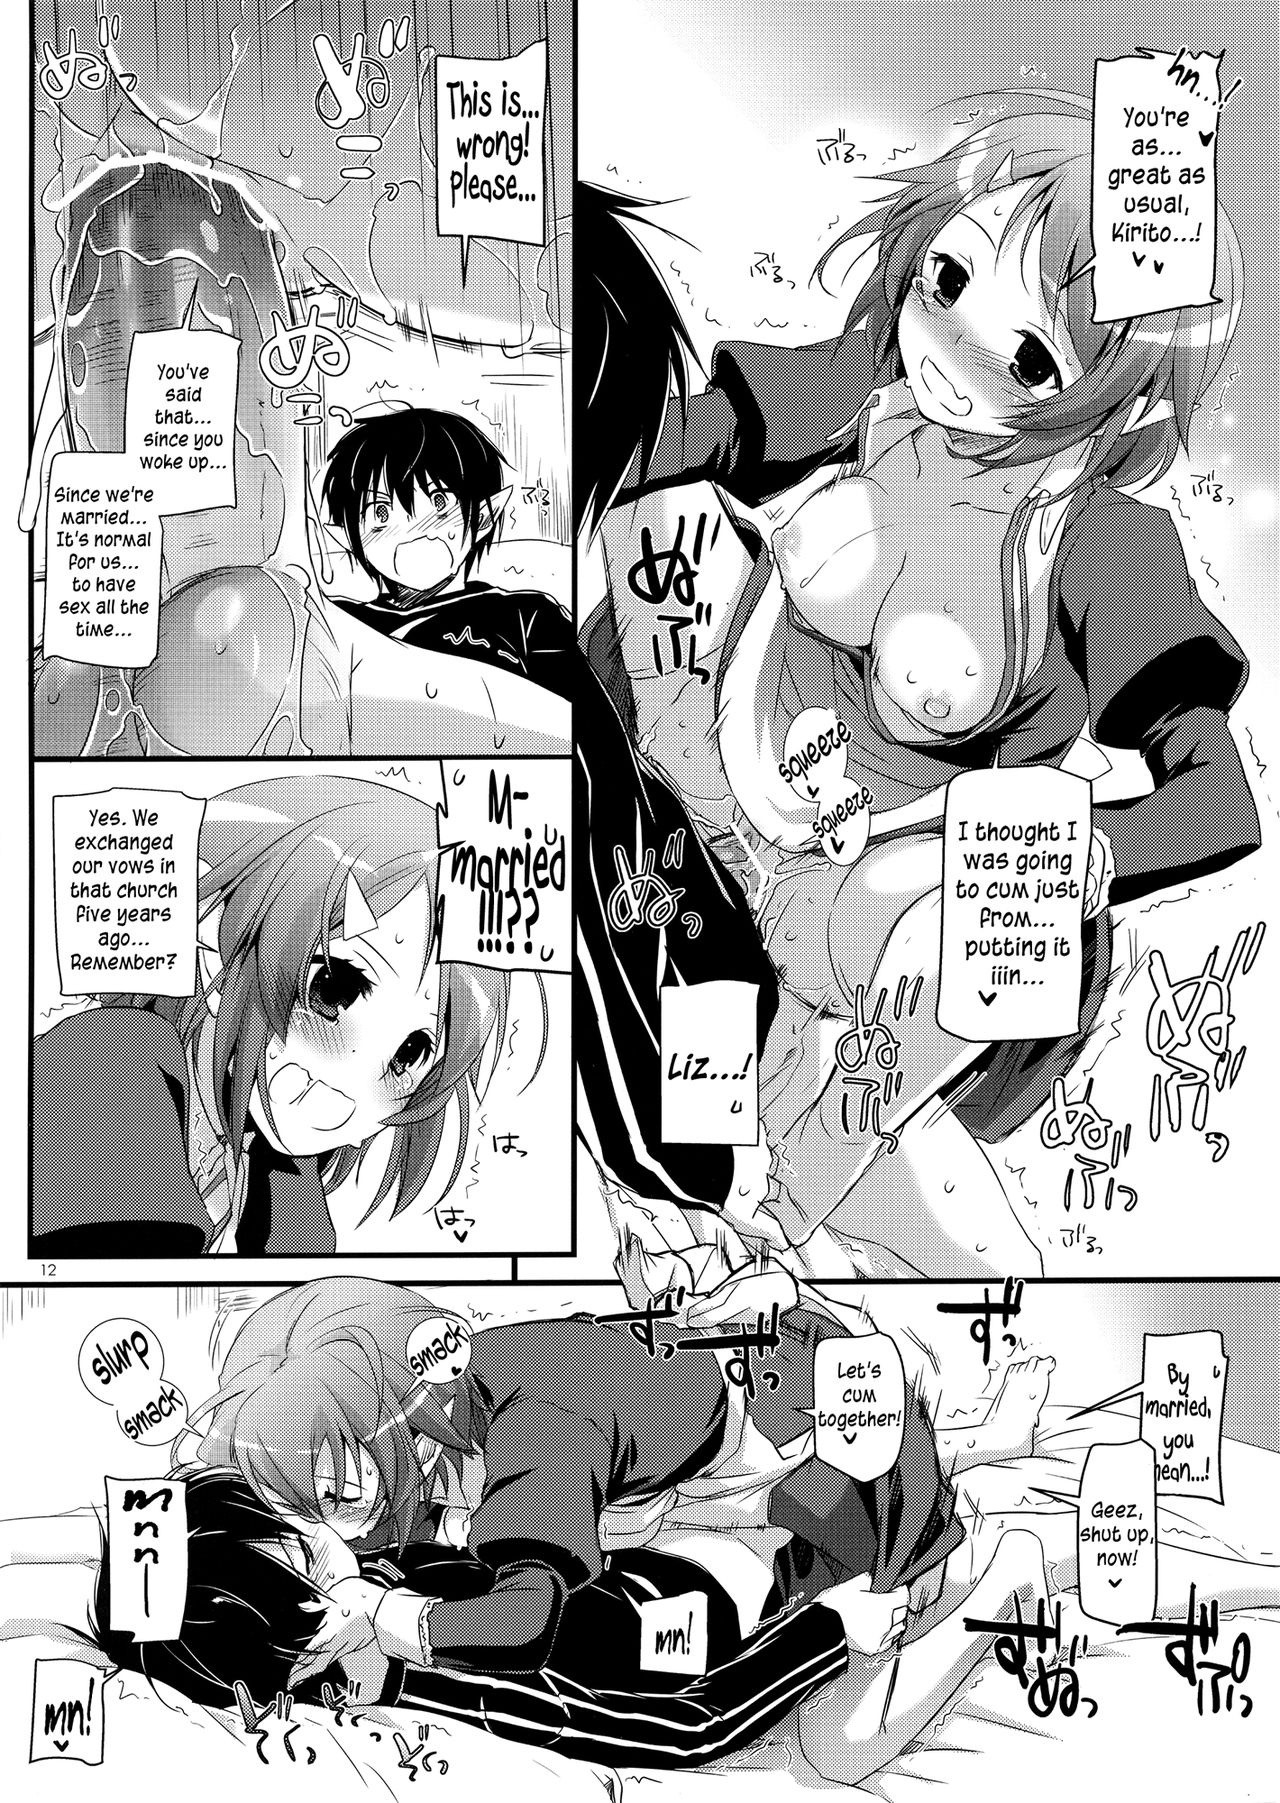 D.L. Action 72 hentai manga picture 11